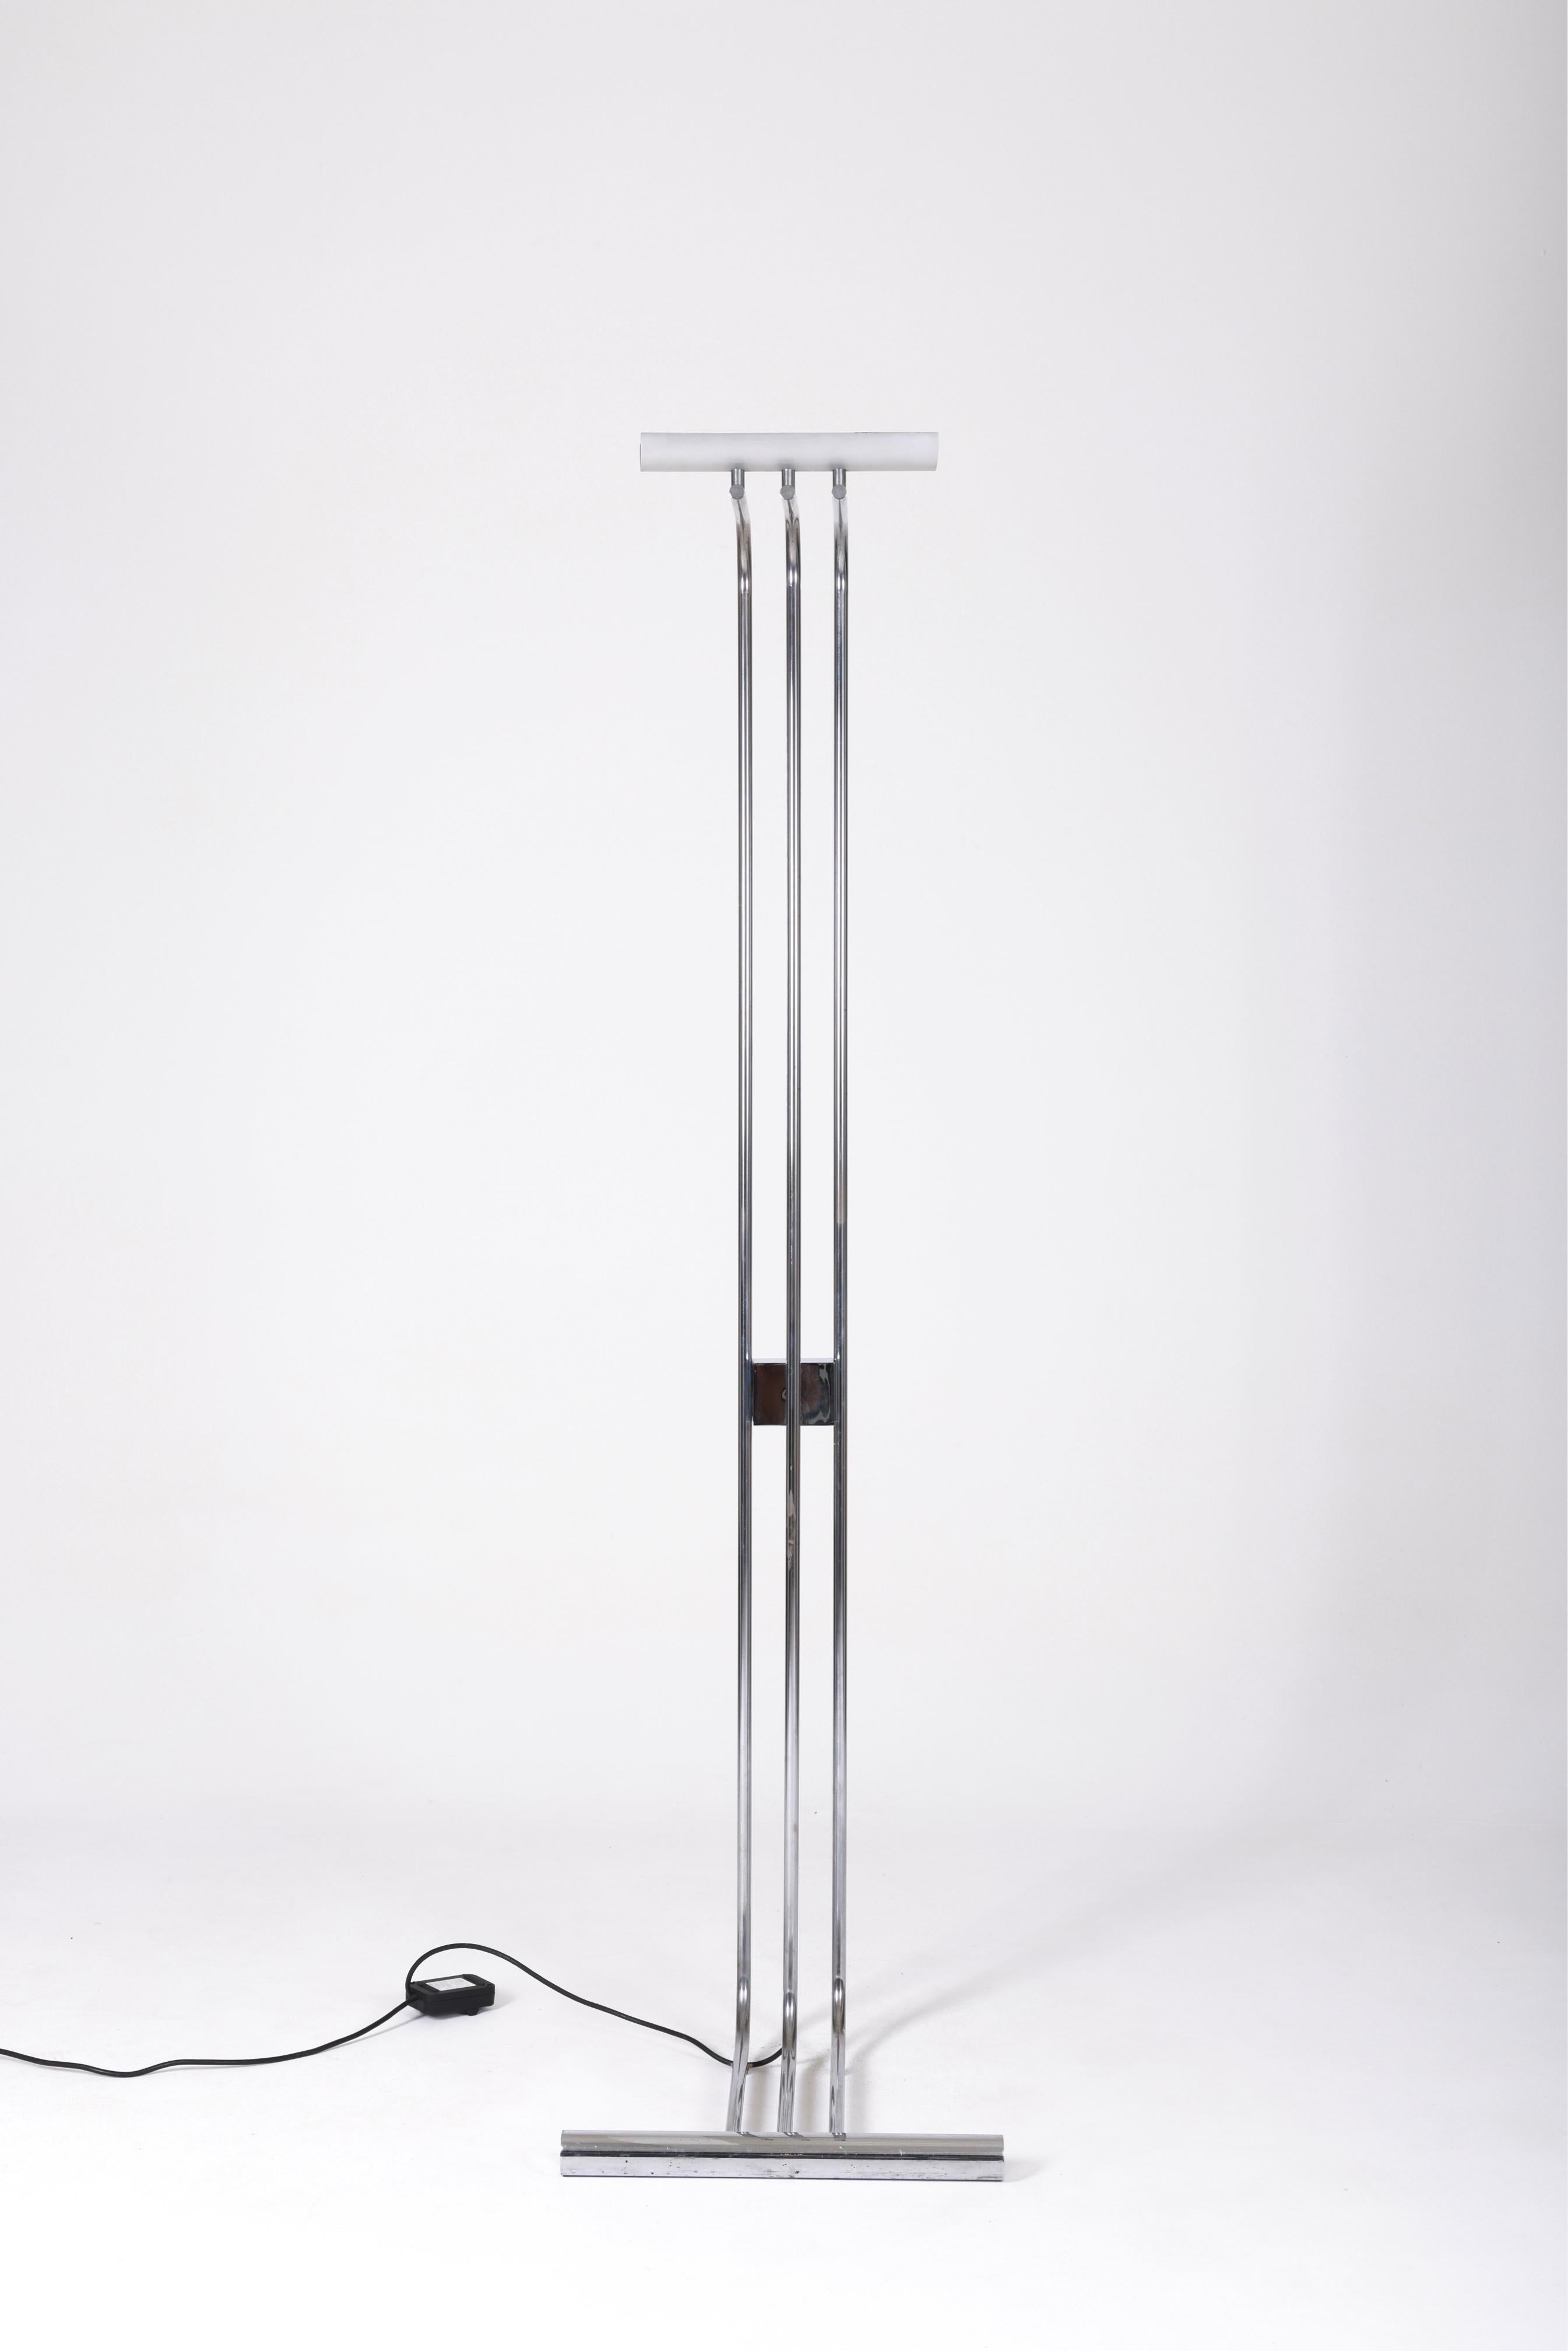 Floor lamp 10507 published by Verre Lumière in the 1970s. Functional and in beautiful condition.
Lp1113.